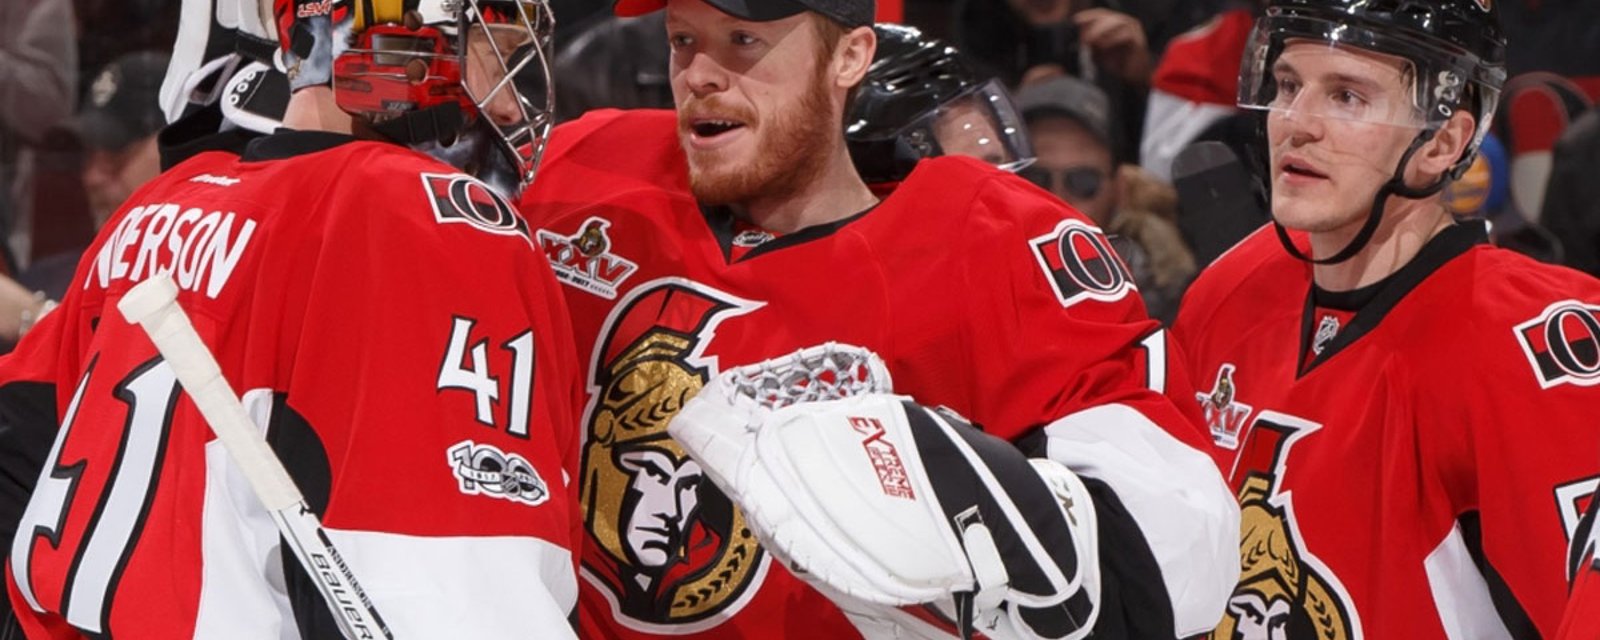 Breaking: Last-minute lineup change for the Sens!